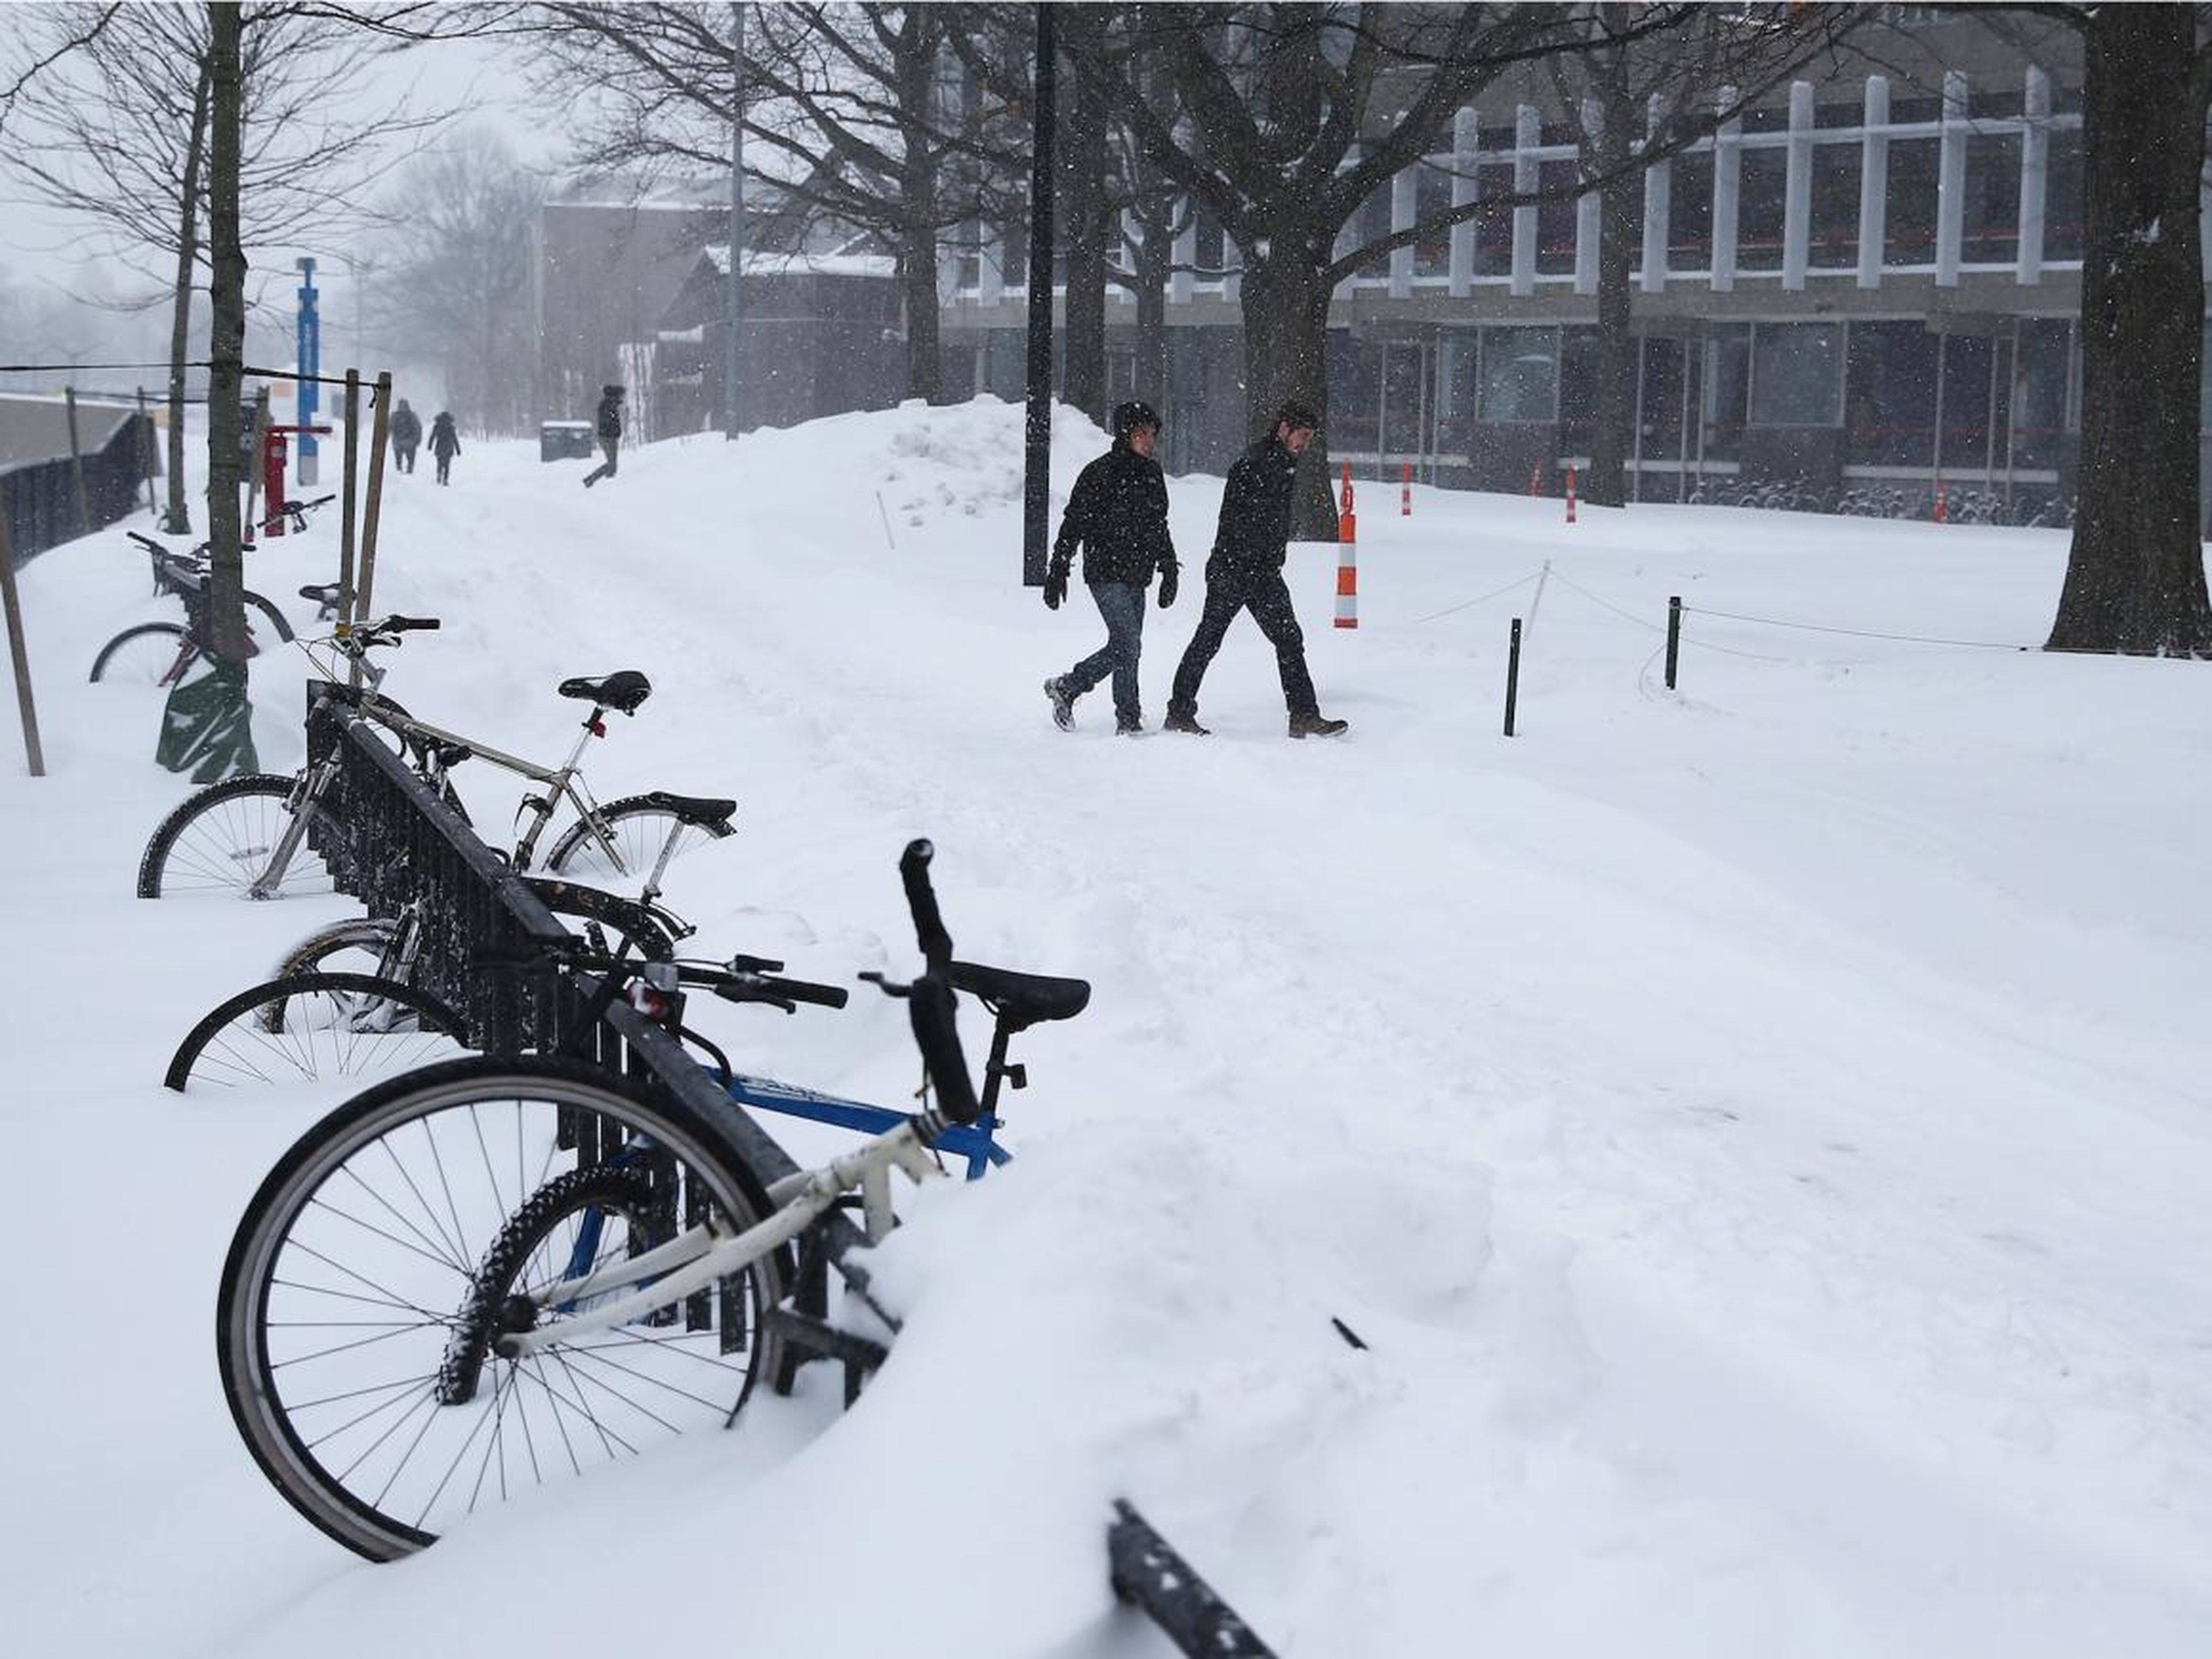 Cambridge sees about 52 inches of snowfall a year.